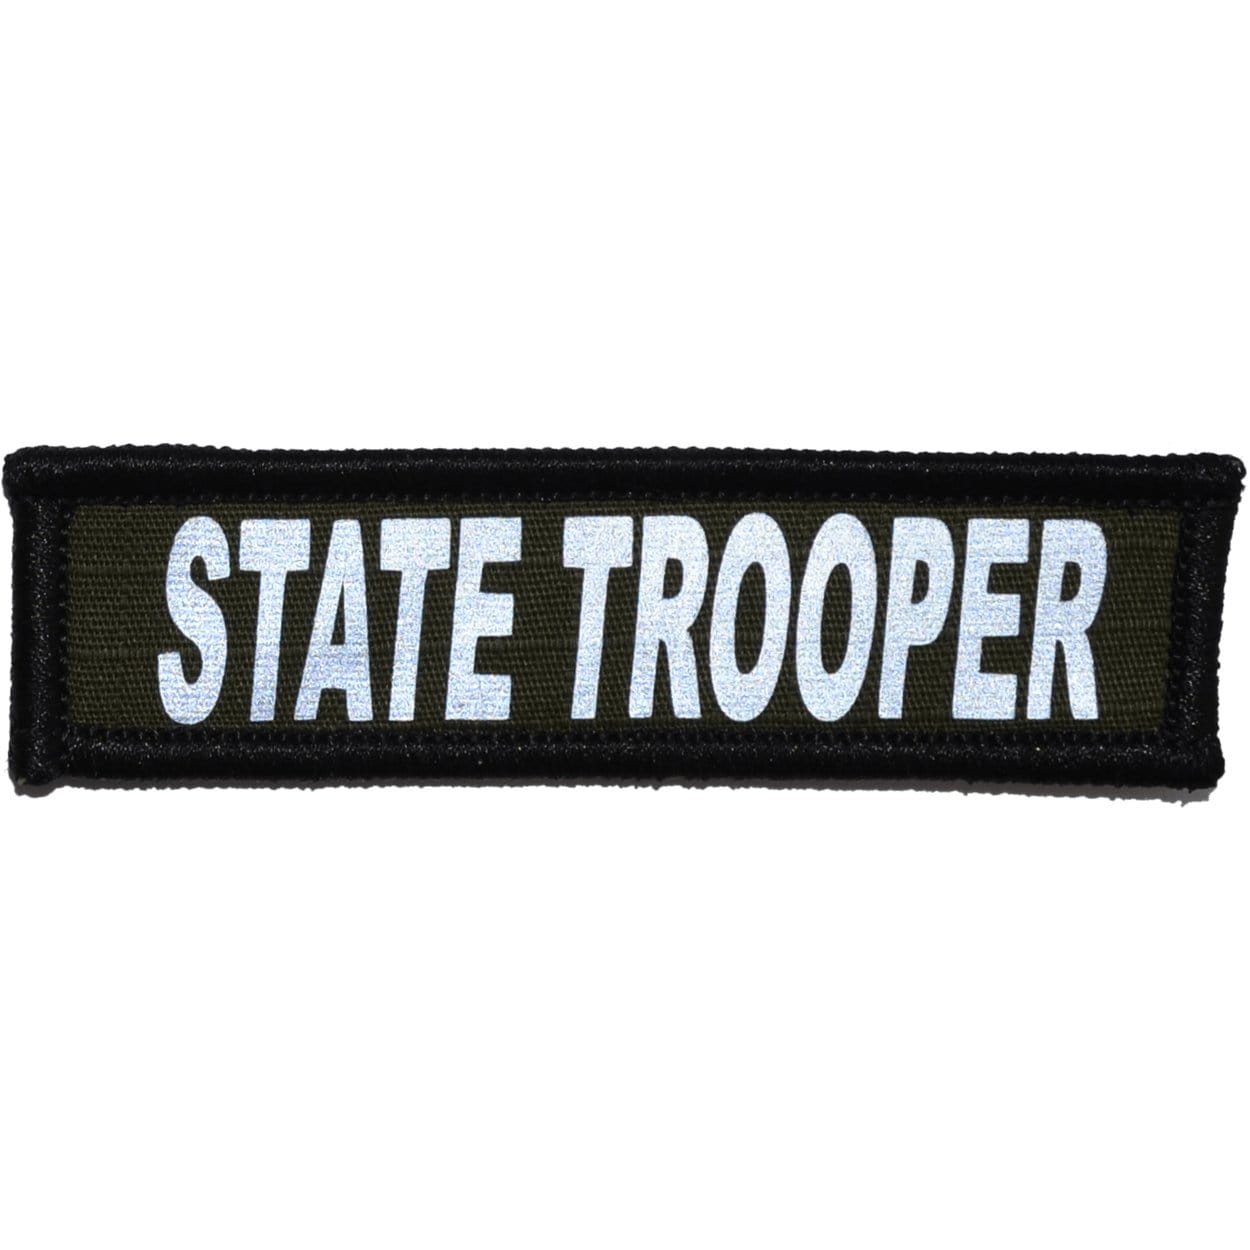 Tactical Gear Junkie Patches Olive Drab State Trooper Reflective - 1x3.75 Patch